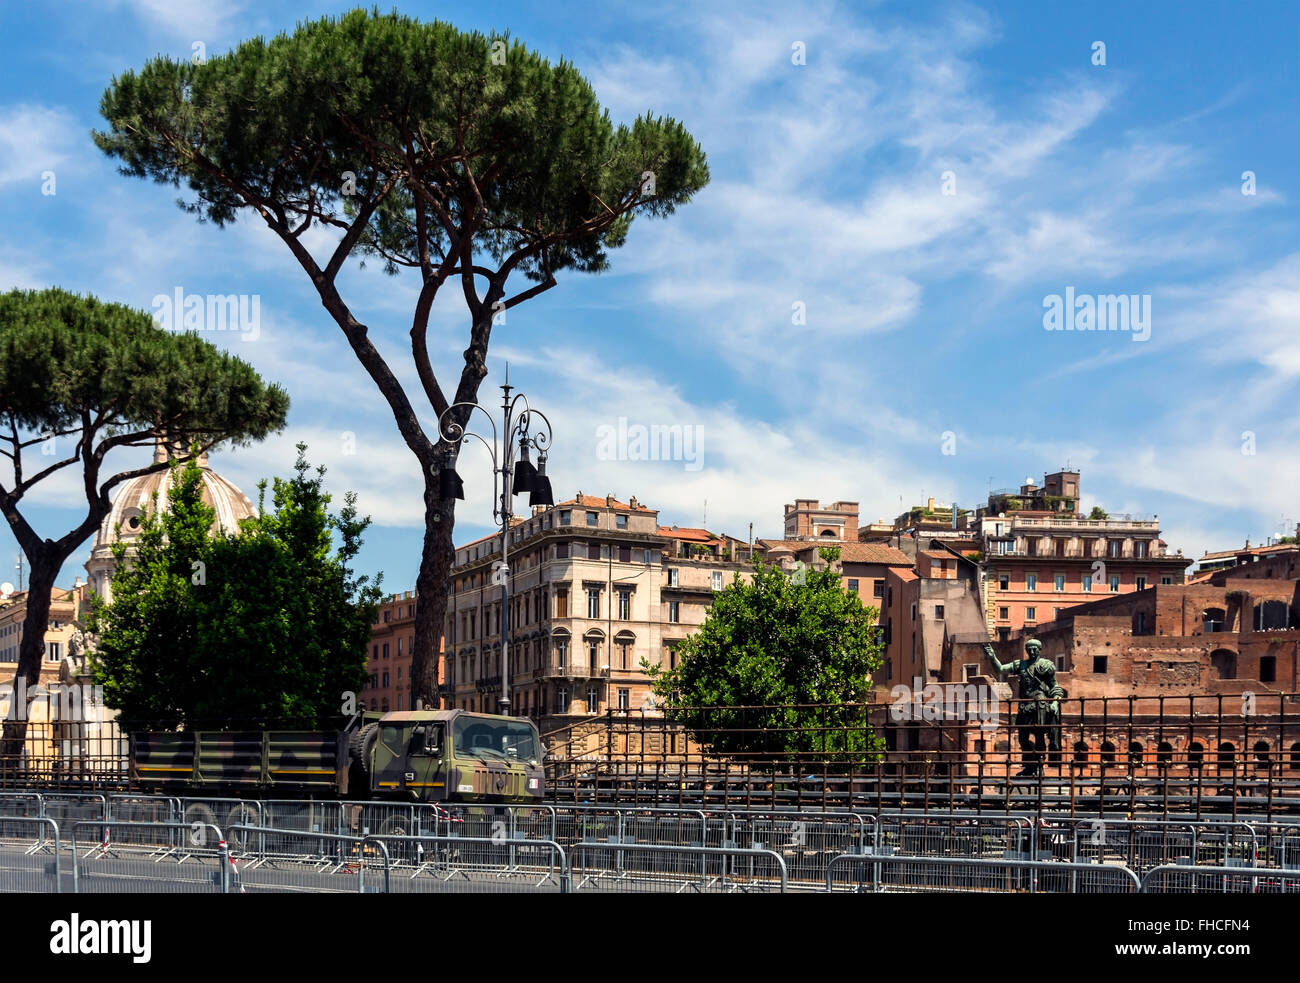 A camouflaged military truck, part of a visible military presence in central Rome on Republic Day, 2nd June. Stock Photo